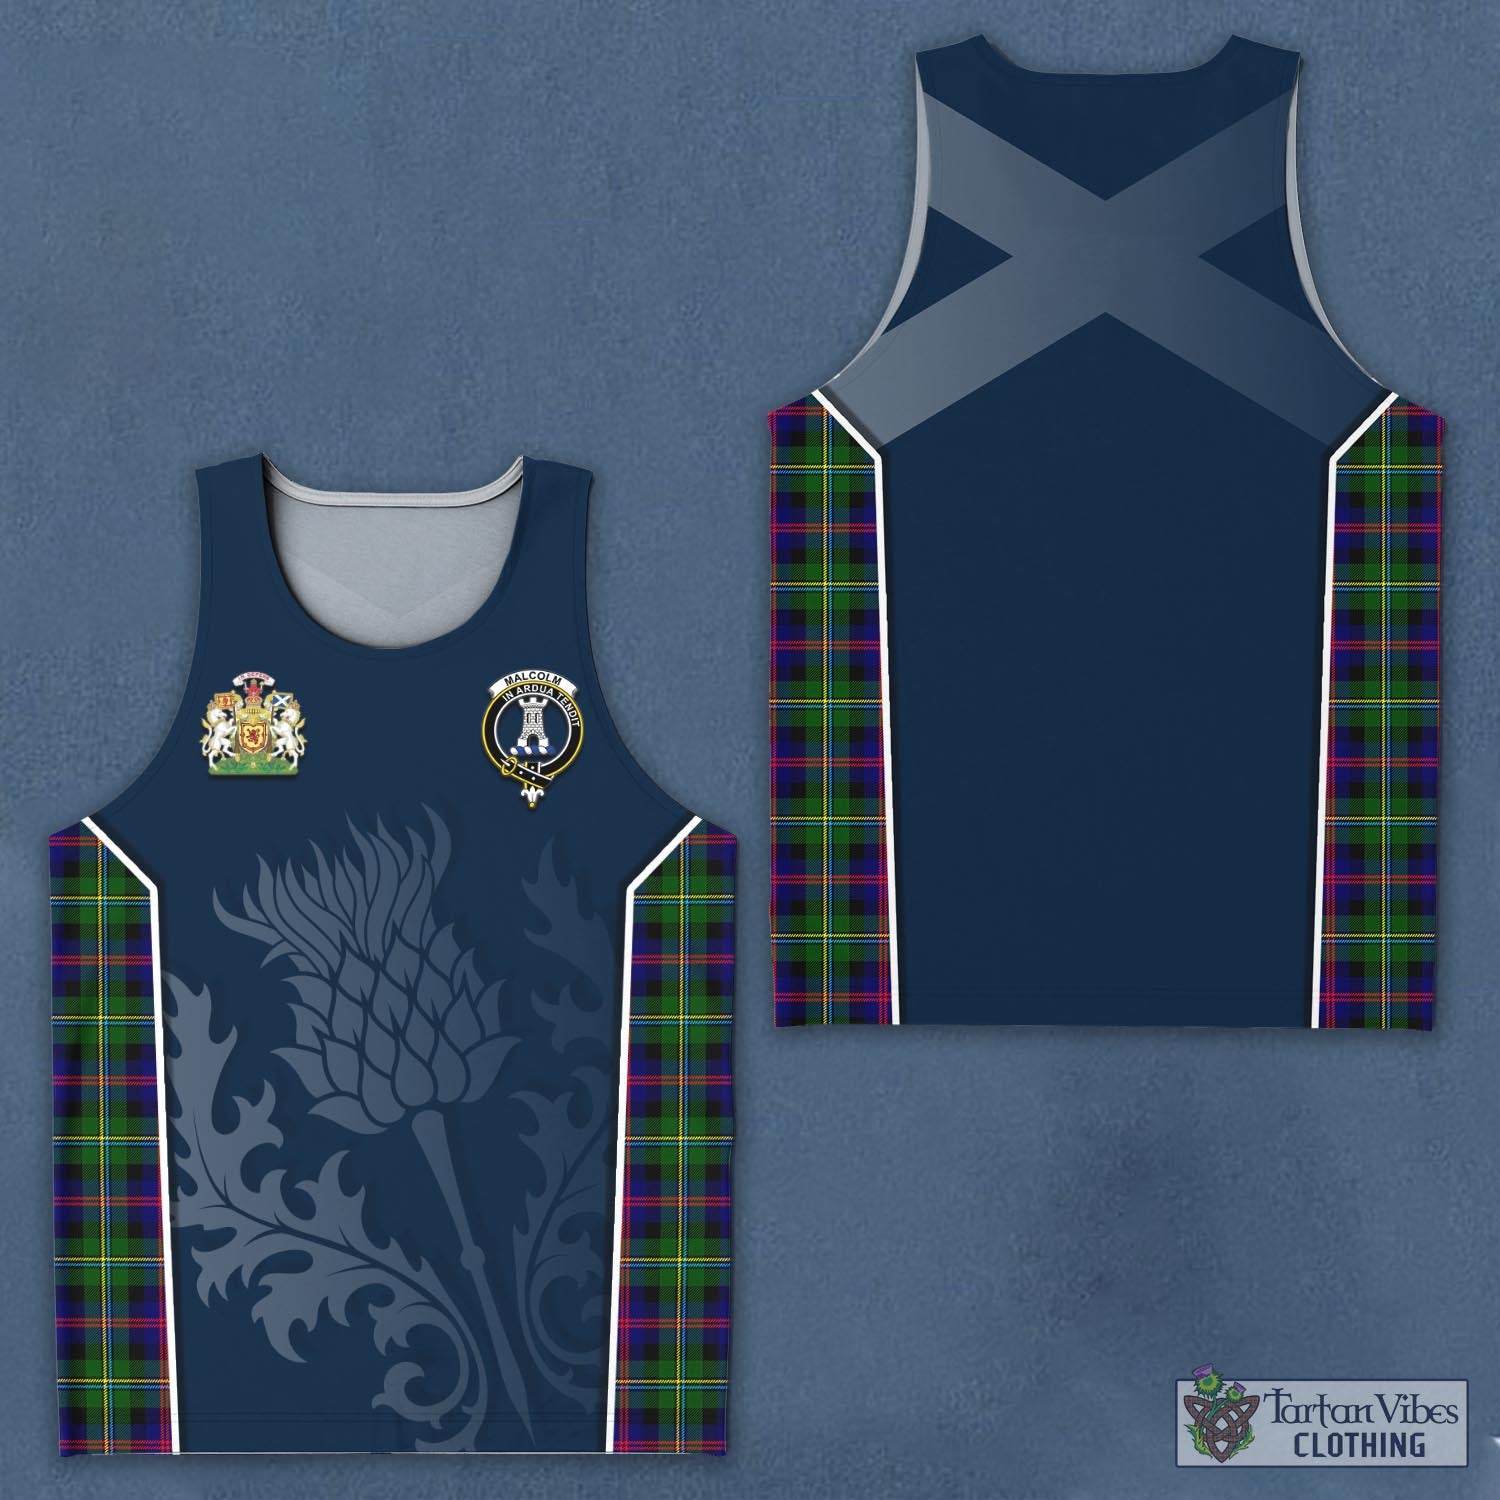 Tartan Vibes Clothing Malcolm Tartan Men's Tanks Top with Family Crest and Scottish Thistle Vibes Sport Style